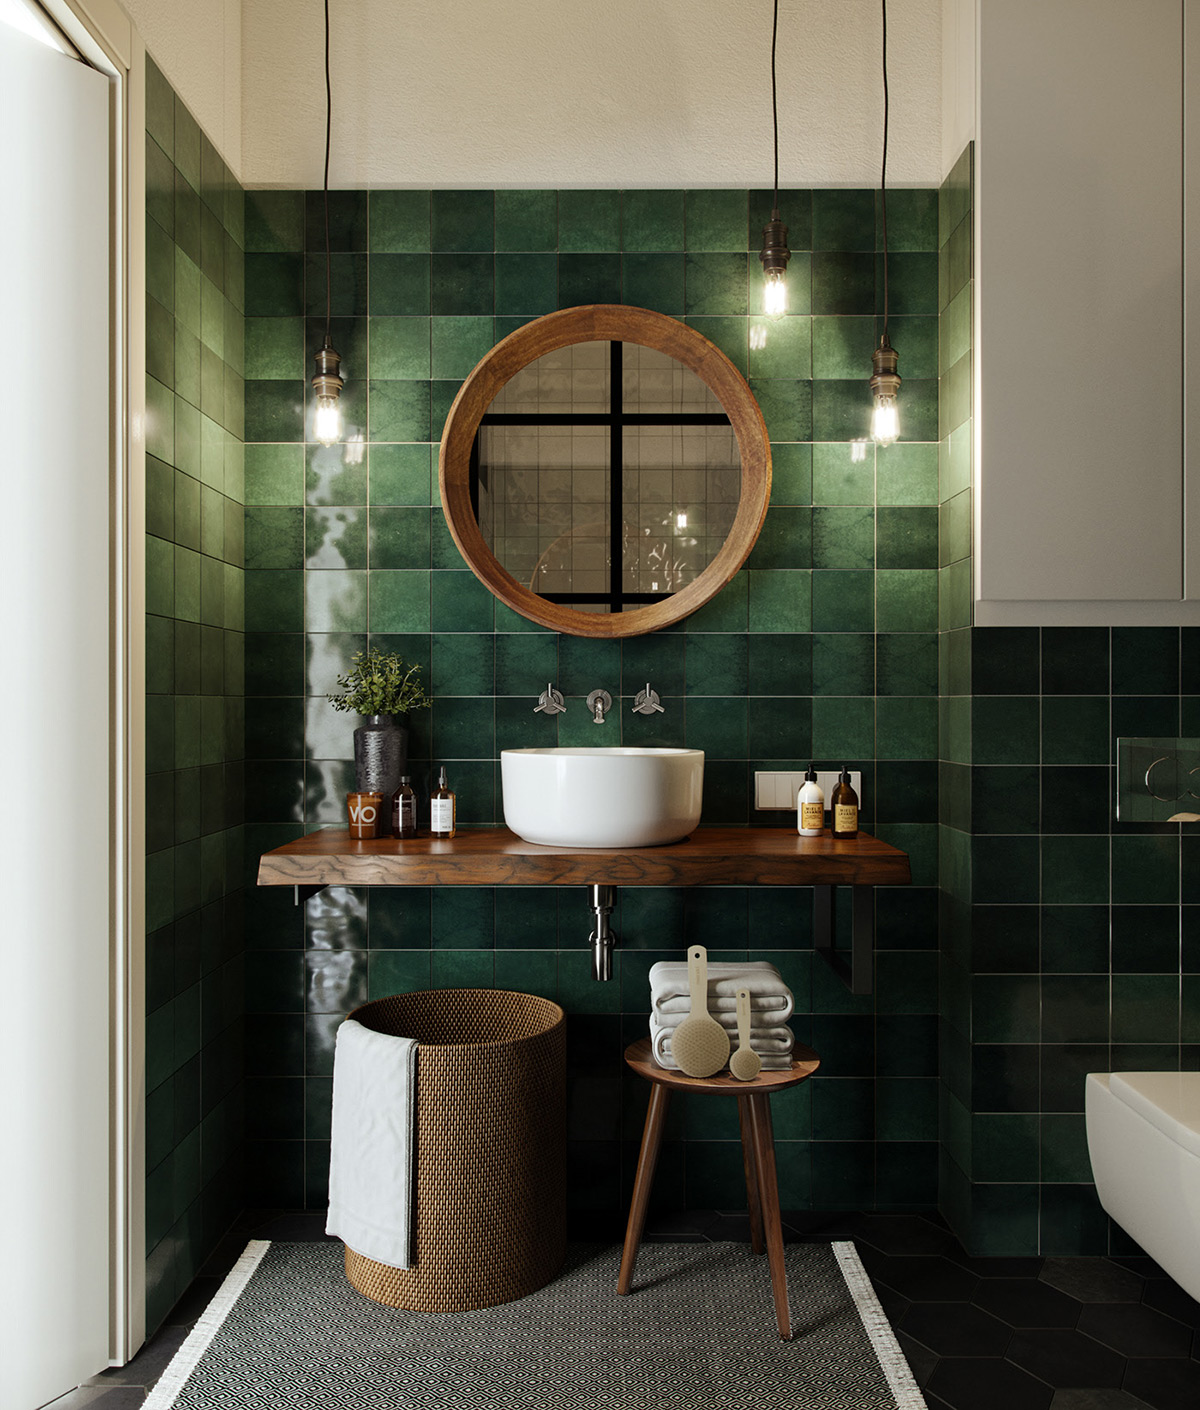 Choose green tiles with shade differences to construct a green feature wall with tonal interest. This one is dressed with chunky wood accent pieces to achieve an earthy appeal.